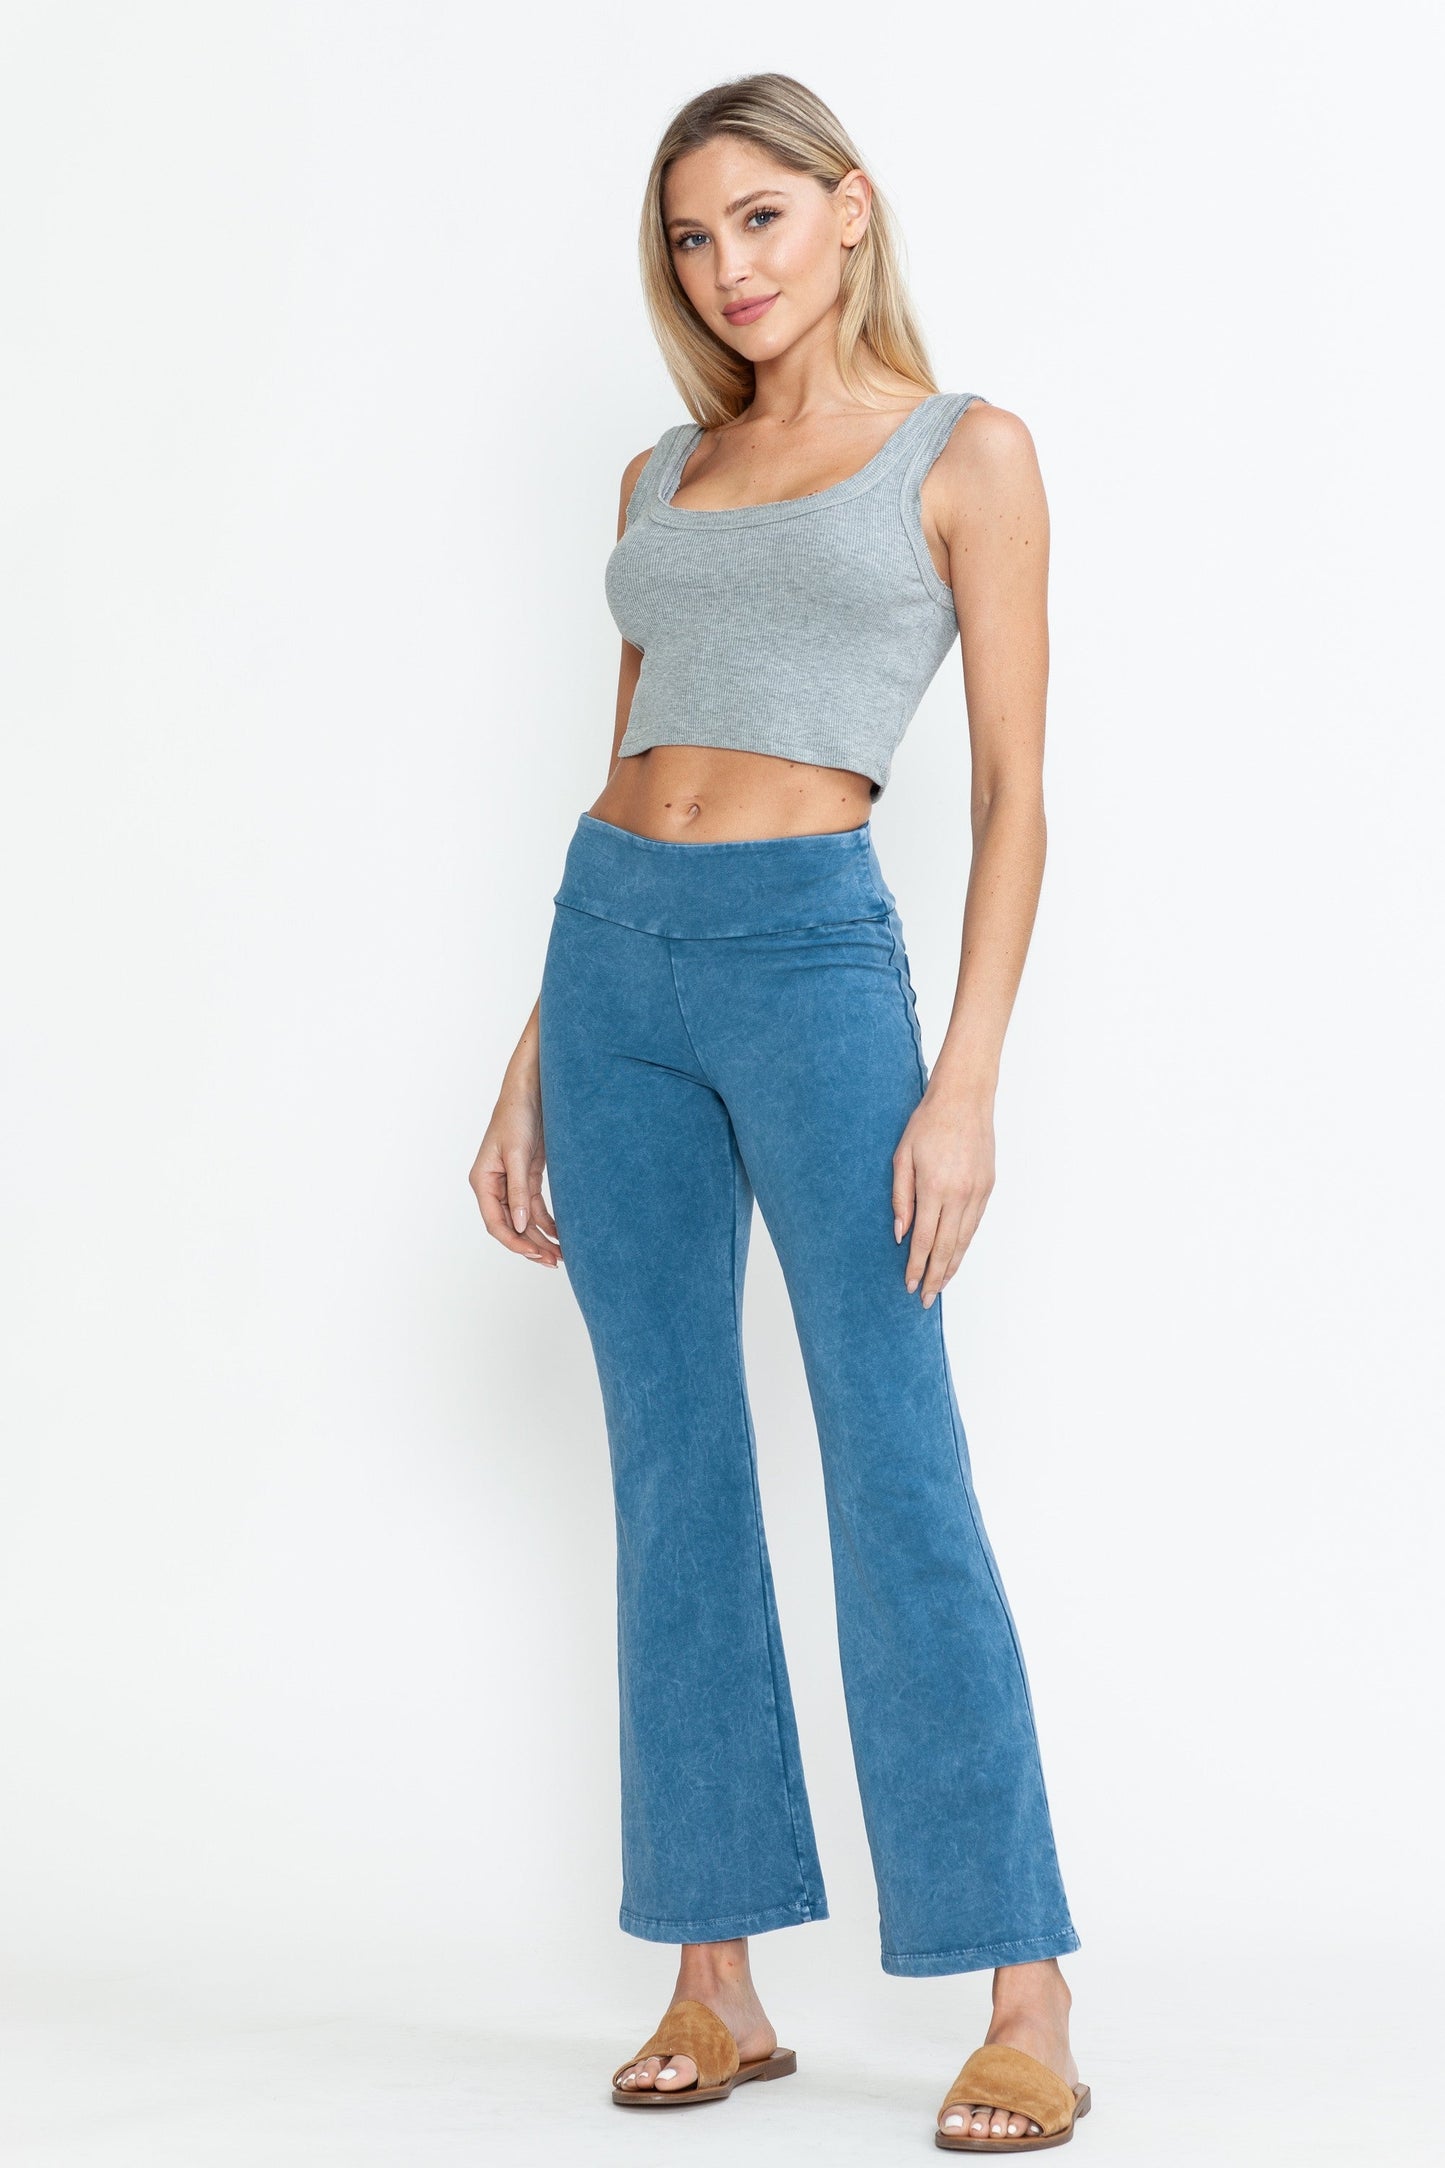 Mineral Washed Cropped Capri Stretch Pants